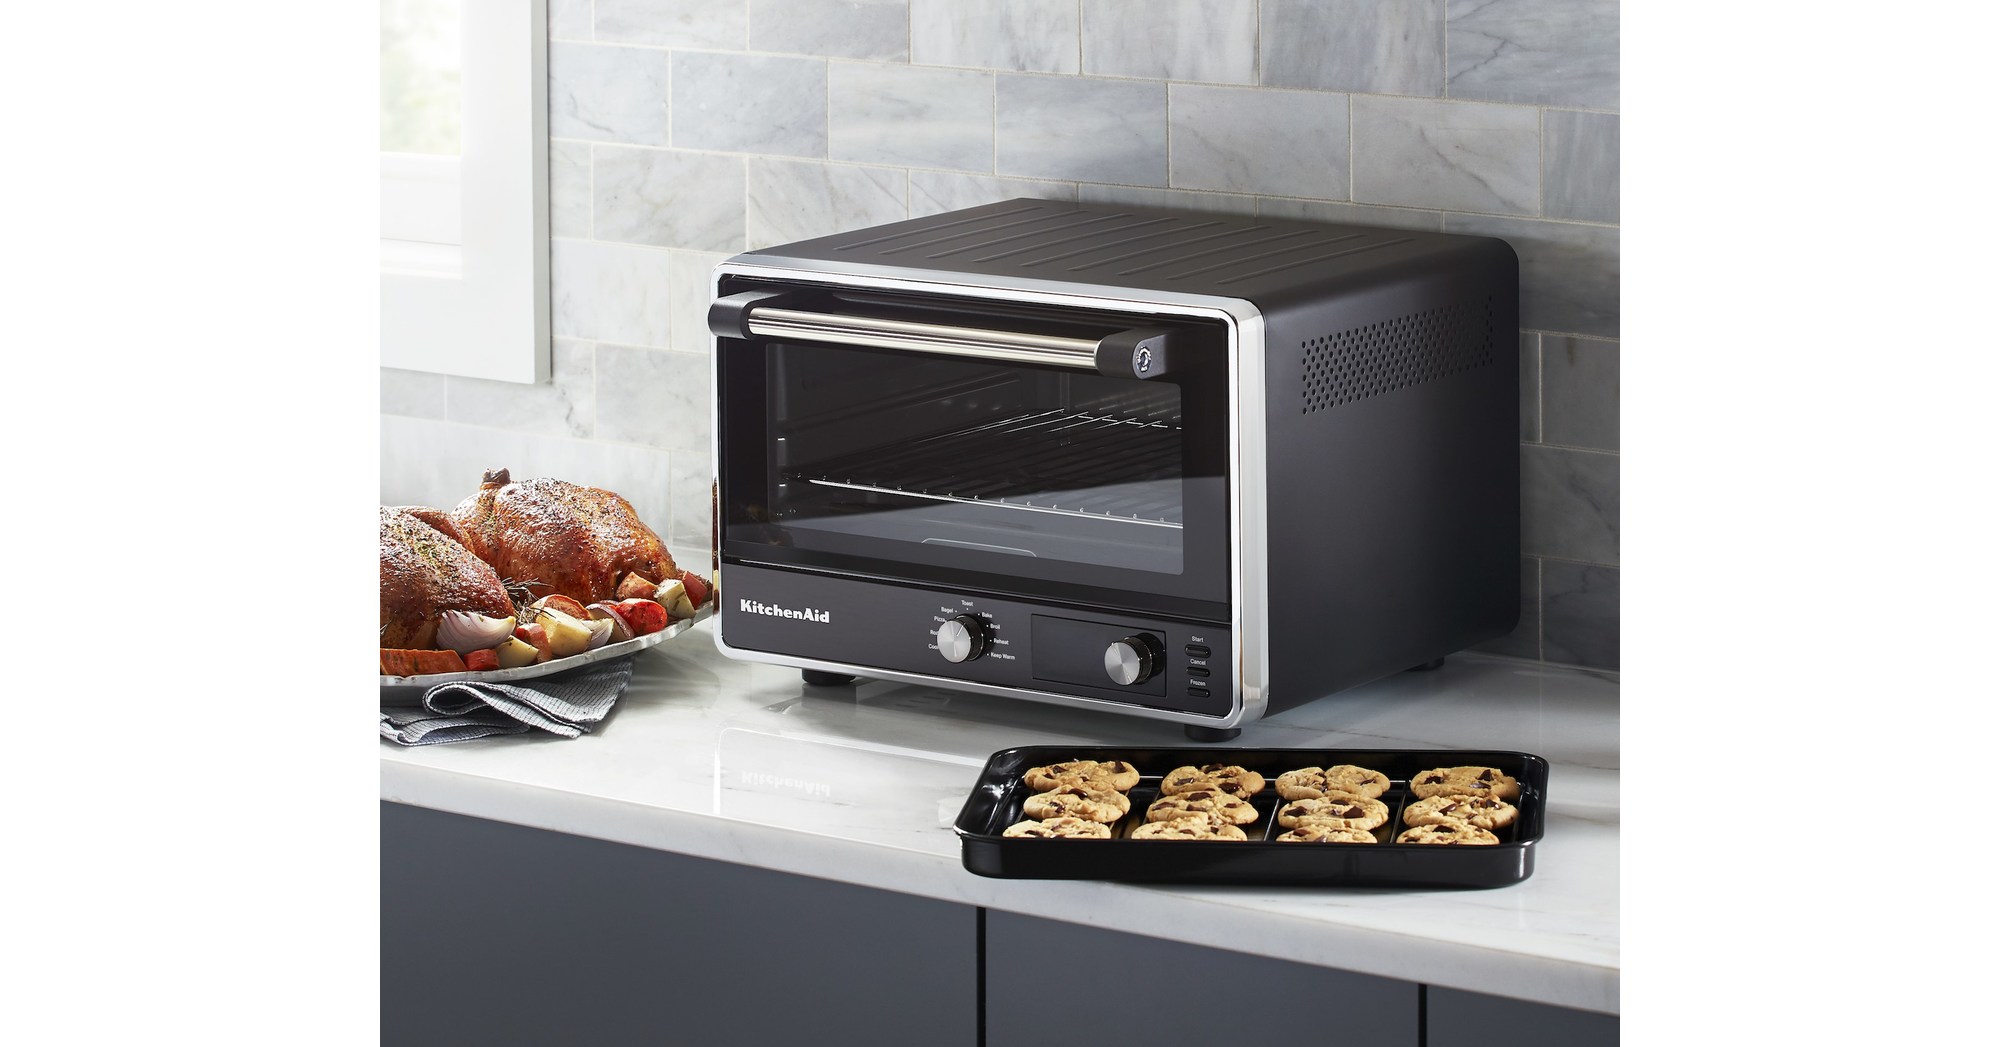 Kitchenaid Brings Full Size Oven Expertise To The Countertop